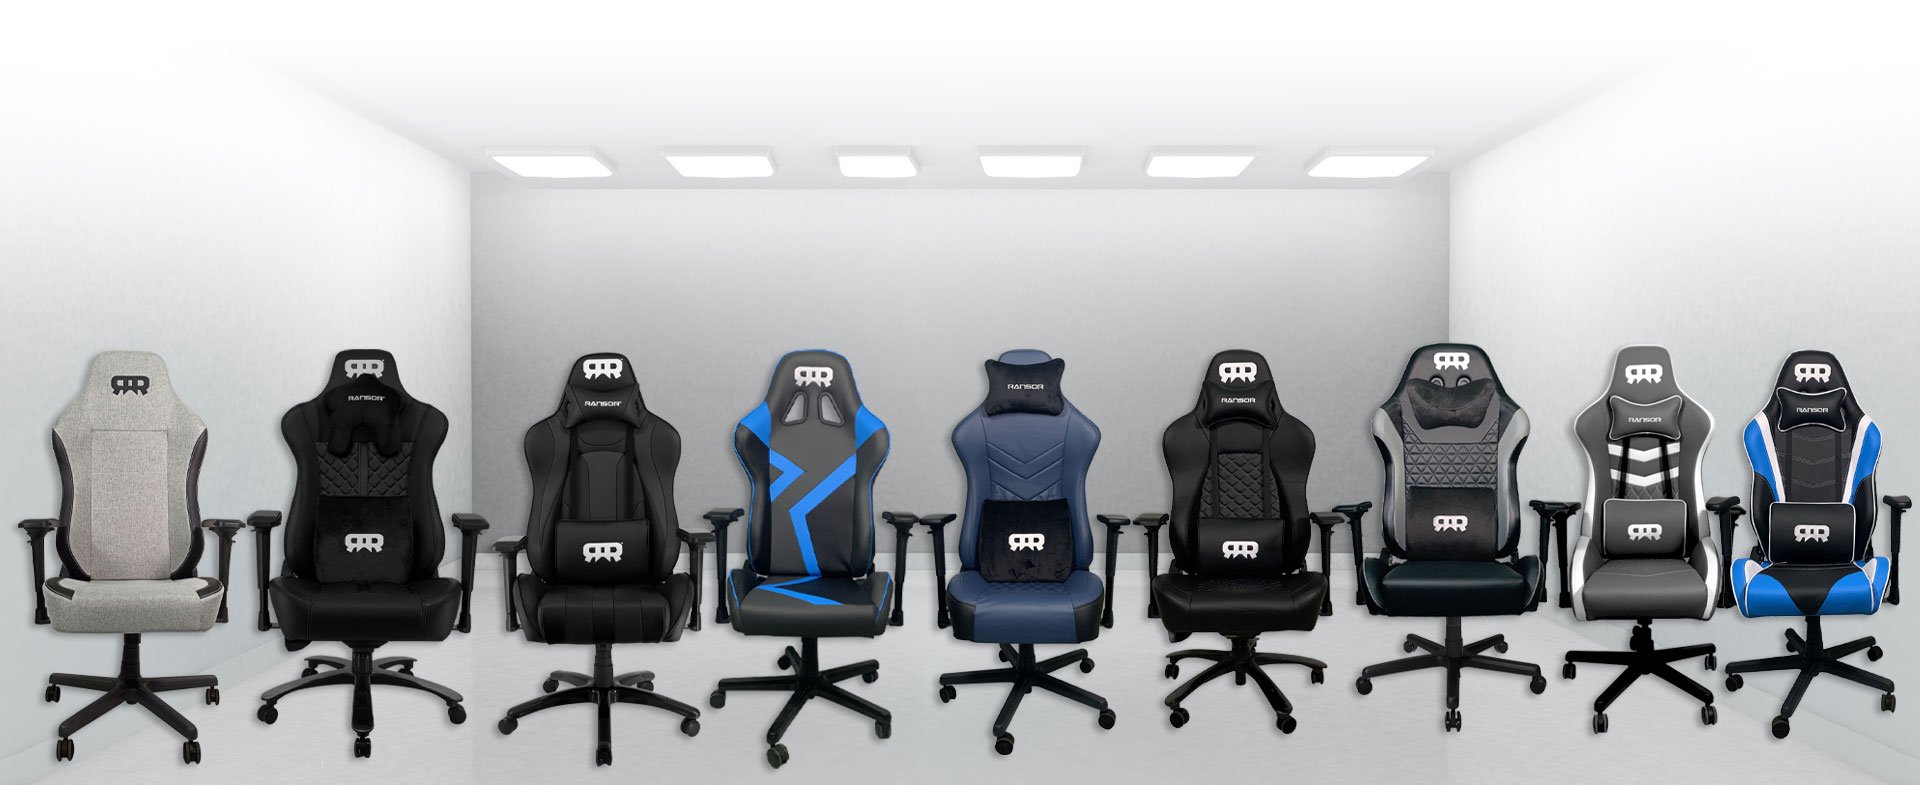 RANSOR Gaming Chairs